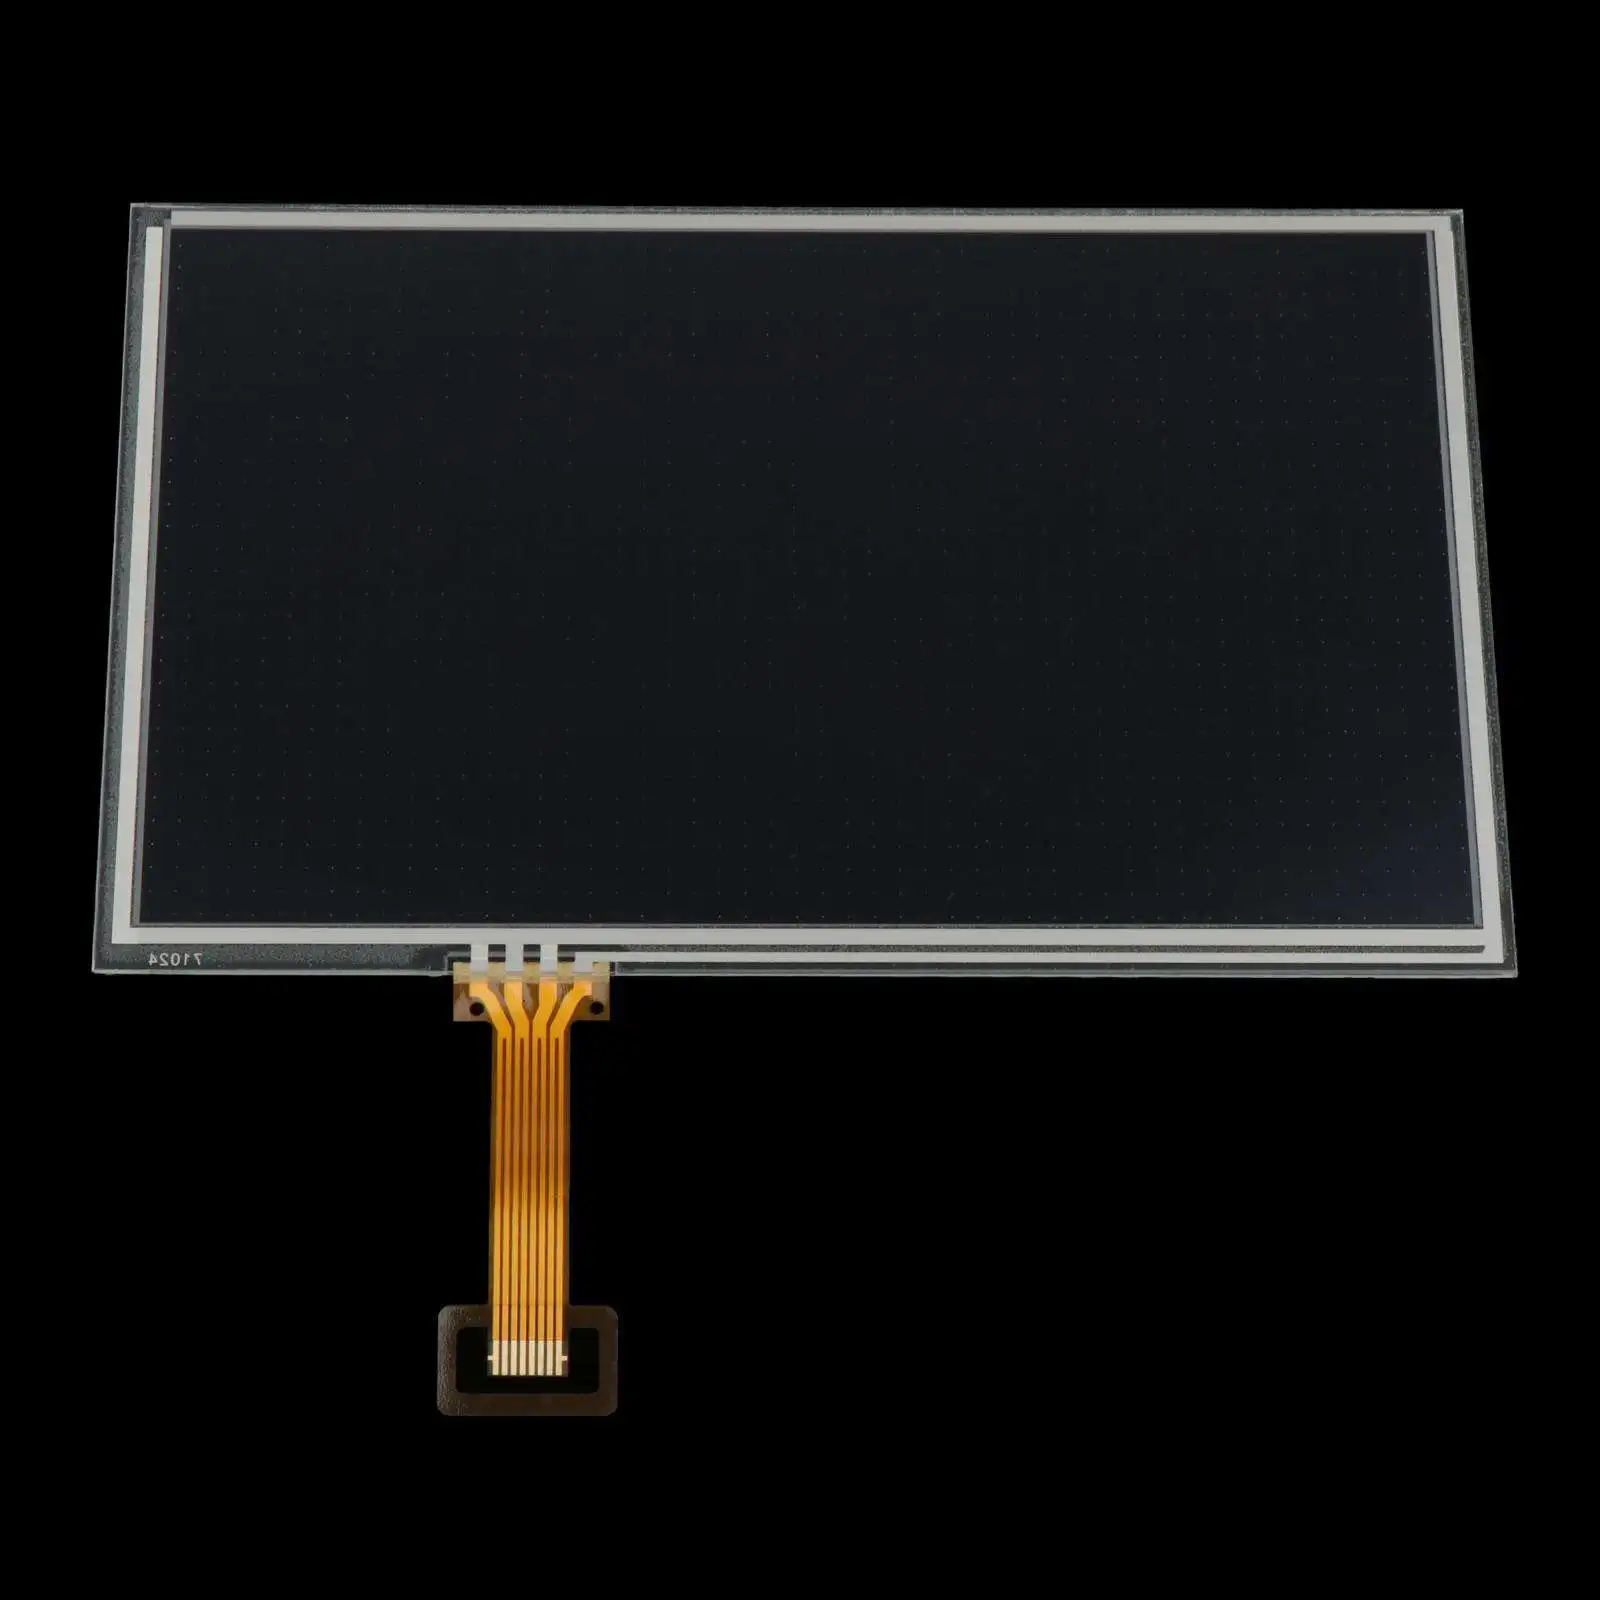 Replacement 8-Pin 7inch Touch Screen Glass Digitizer Touch Panel Fits for Hyundai Sonata Veloster 2013-2016 Repair Cars Radio